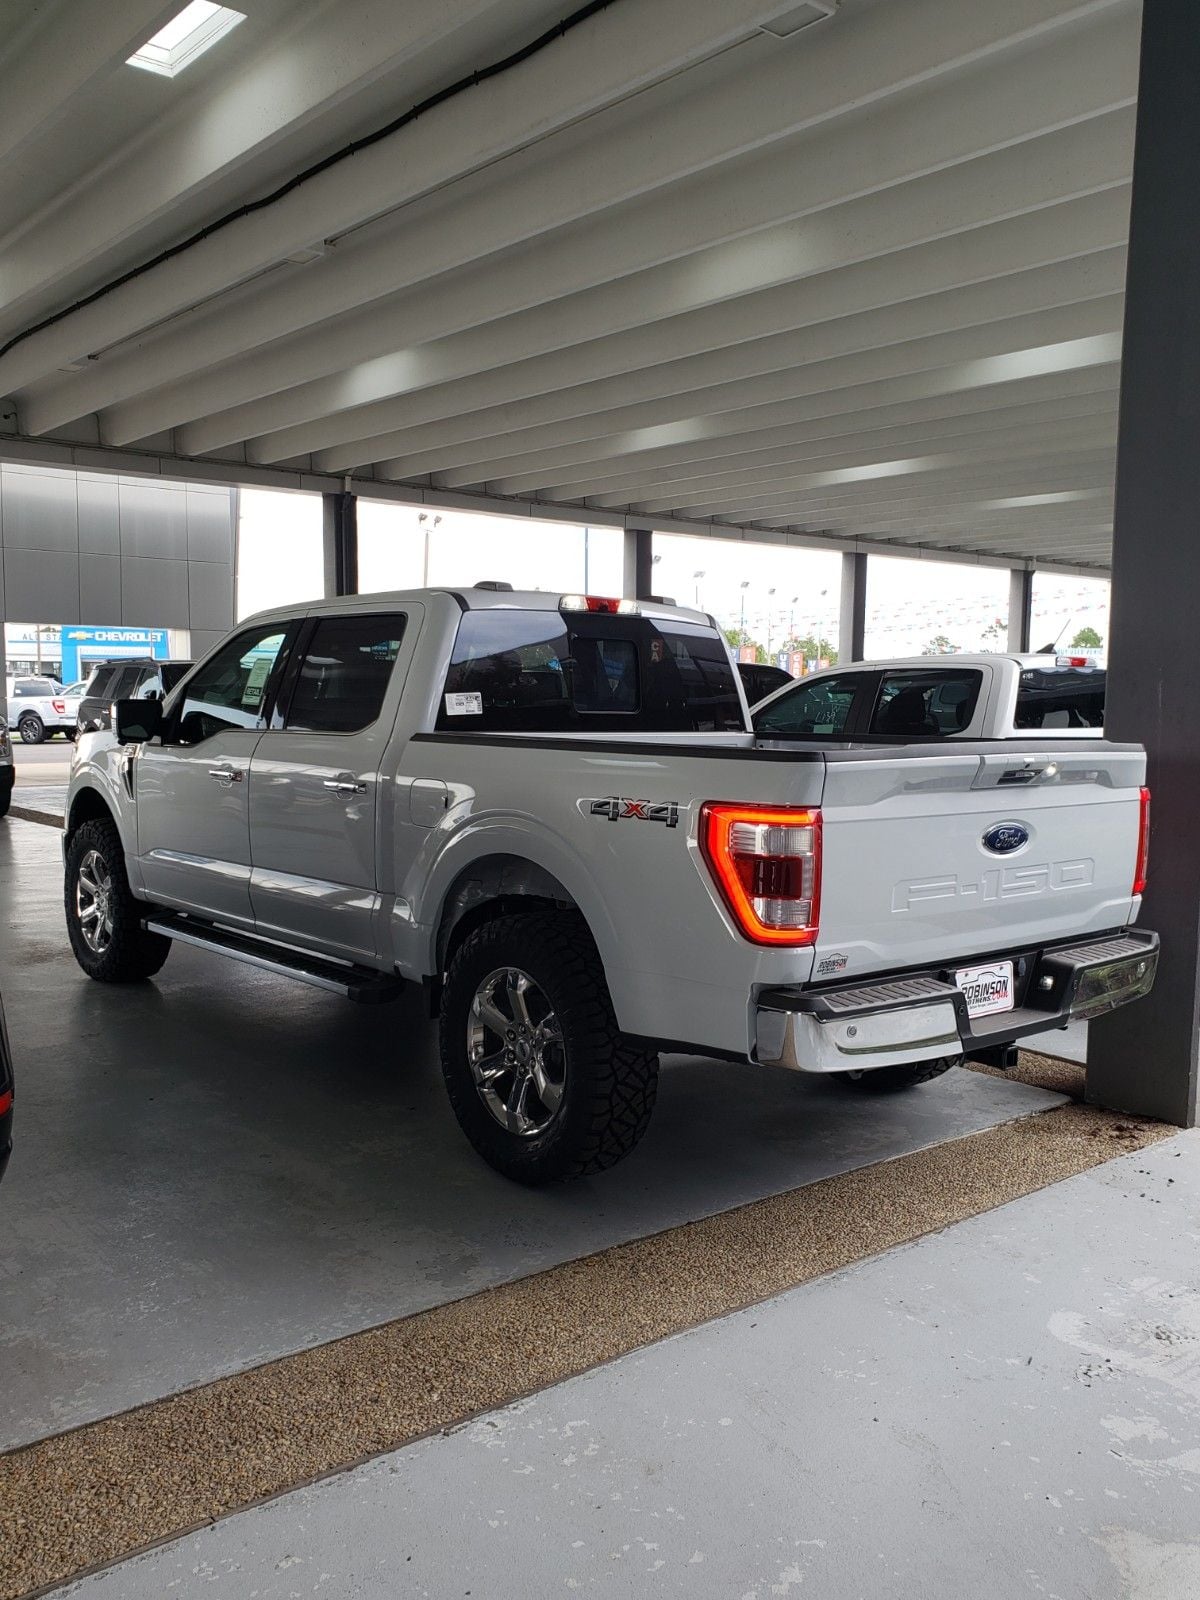 2021 Leveling Kits - Page 20 - Ford F150 Forum - Community of Ford